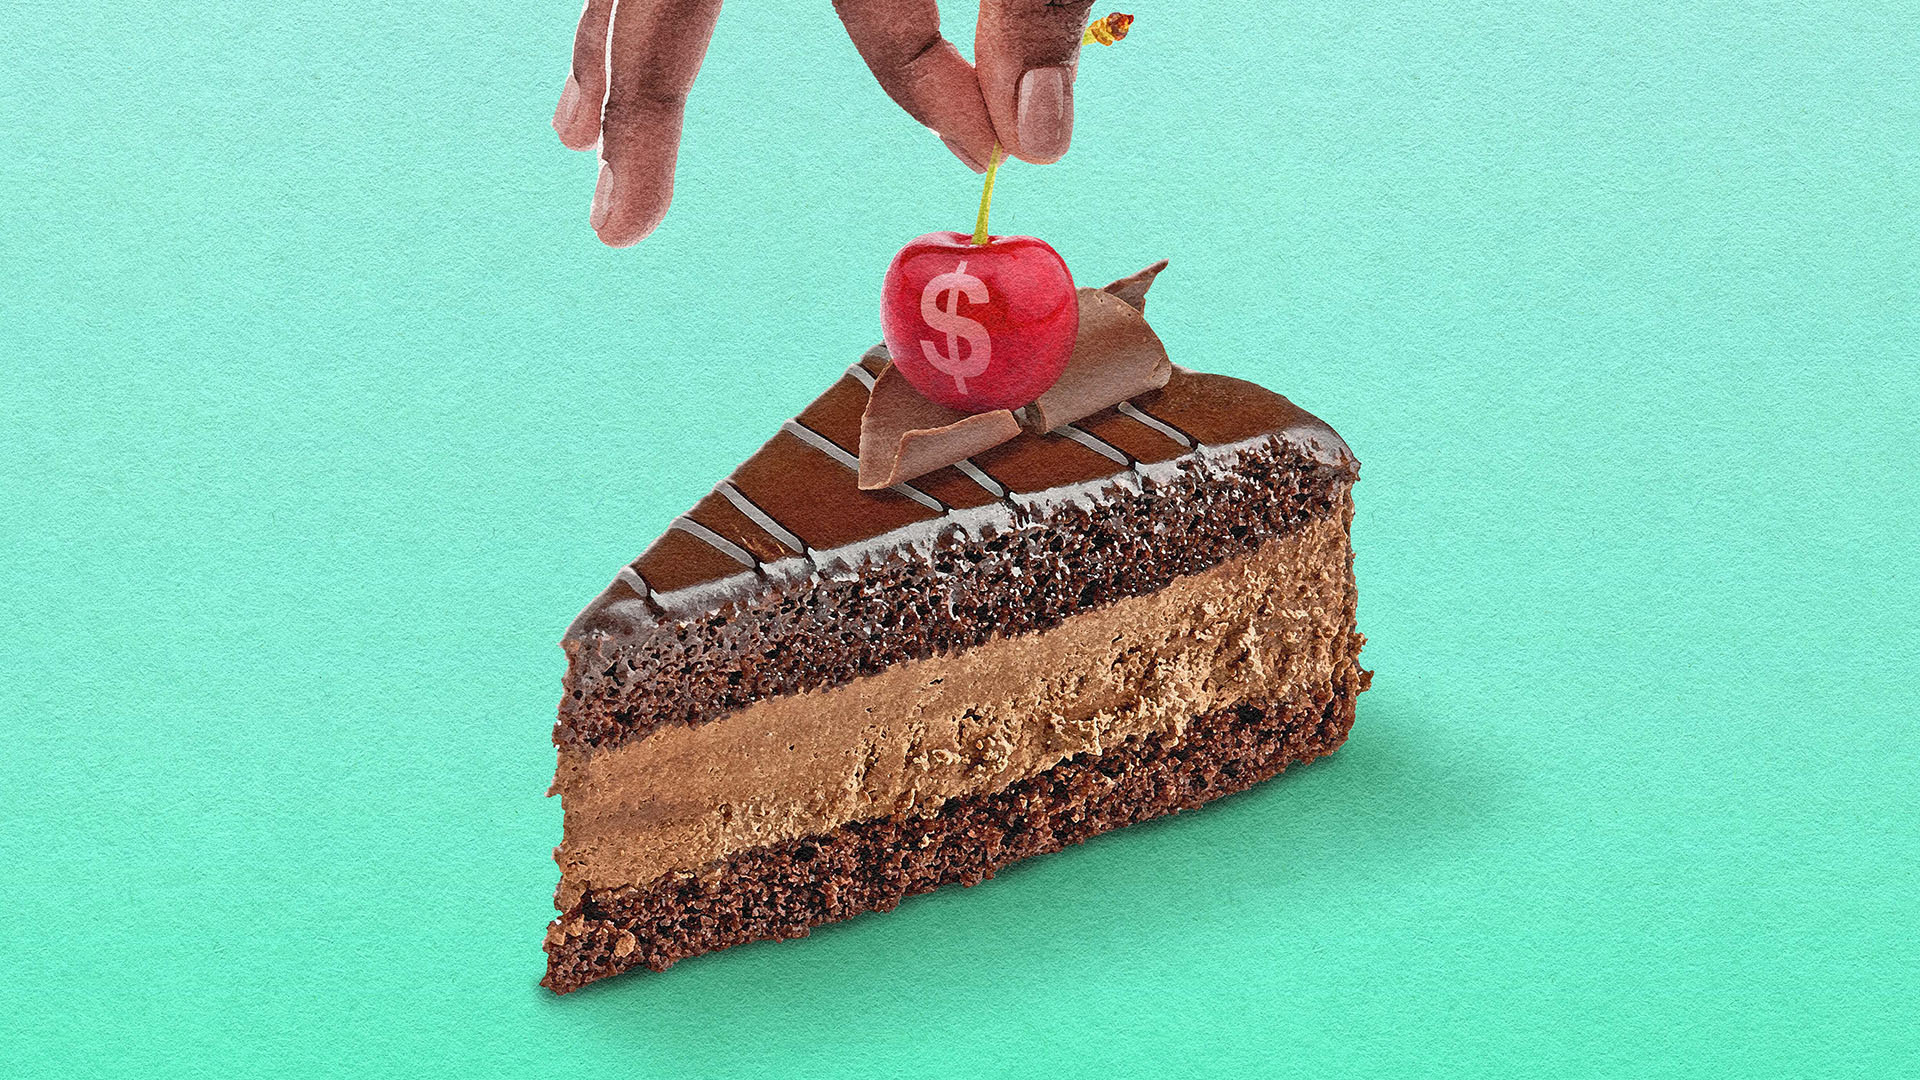 Illustration of a person placing a cherry on top of a chocolate cake. The cherry has a dollar sign on it.